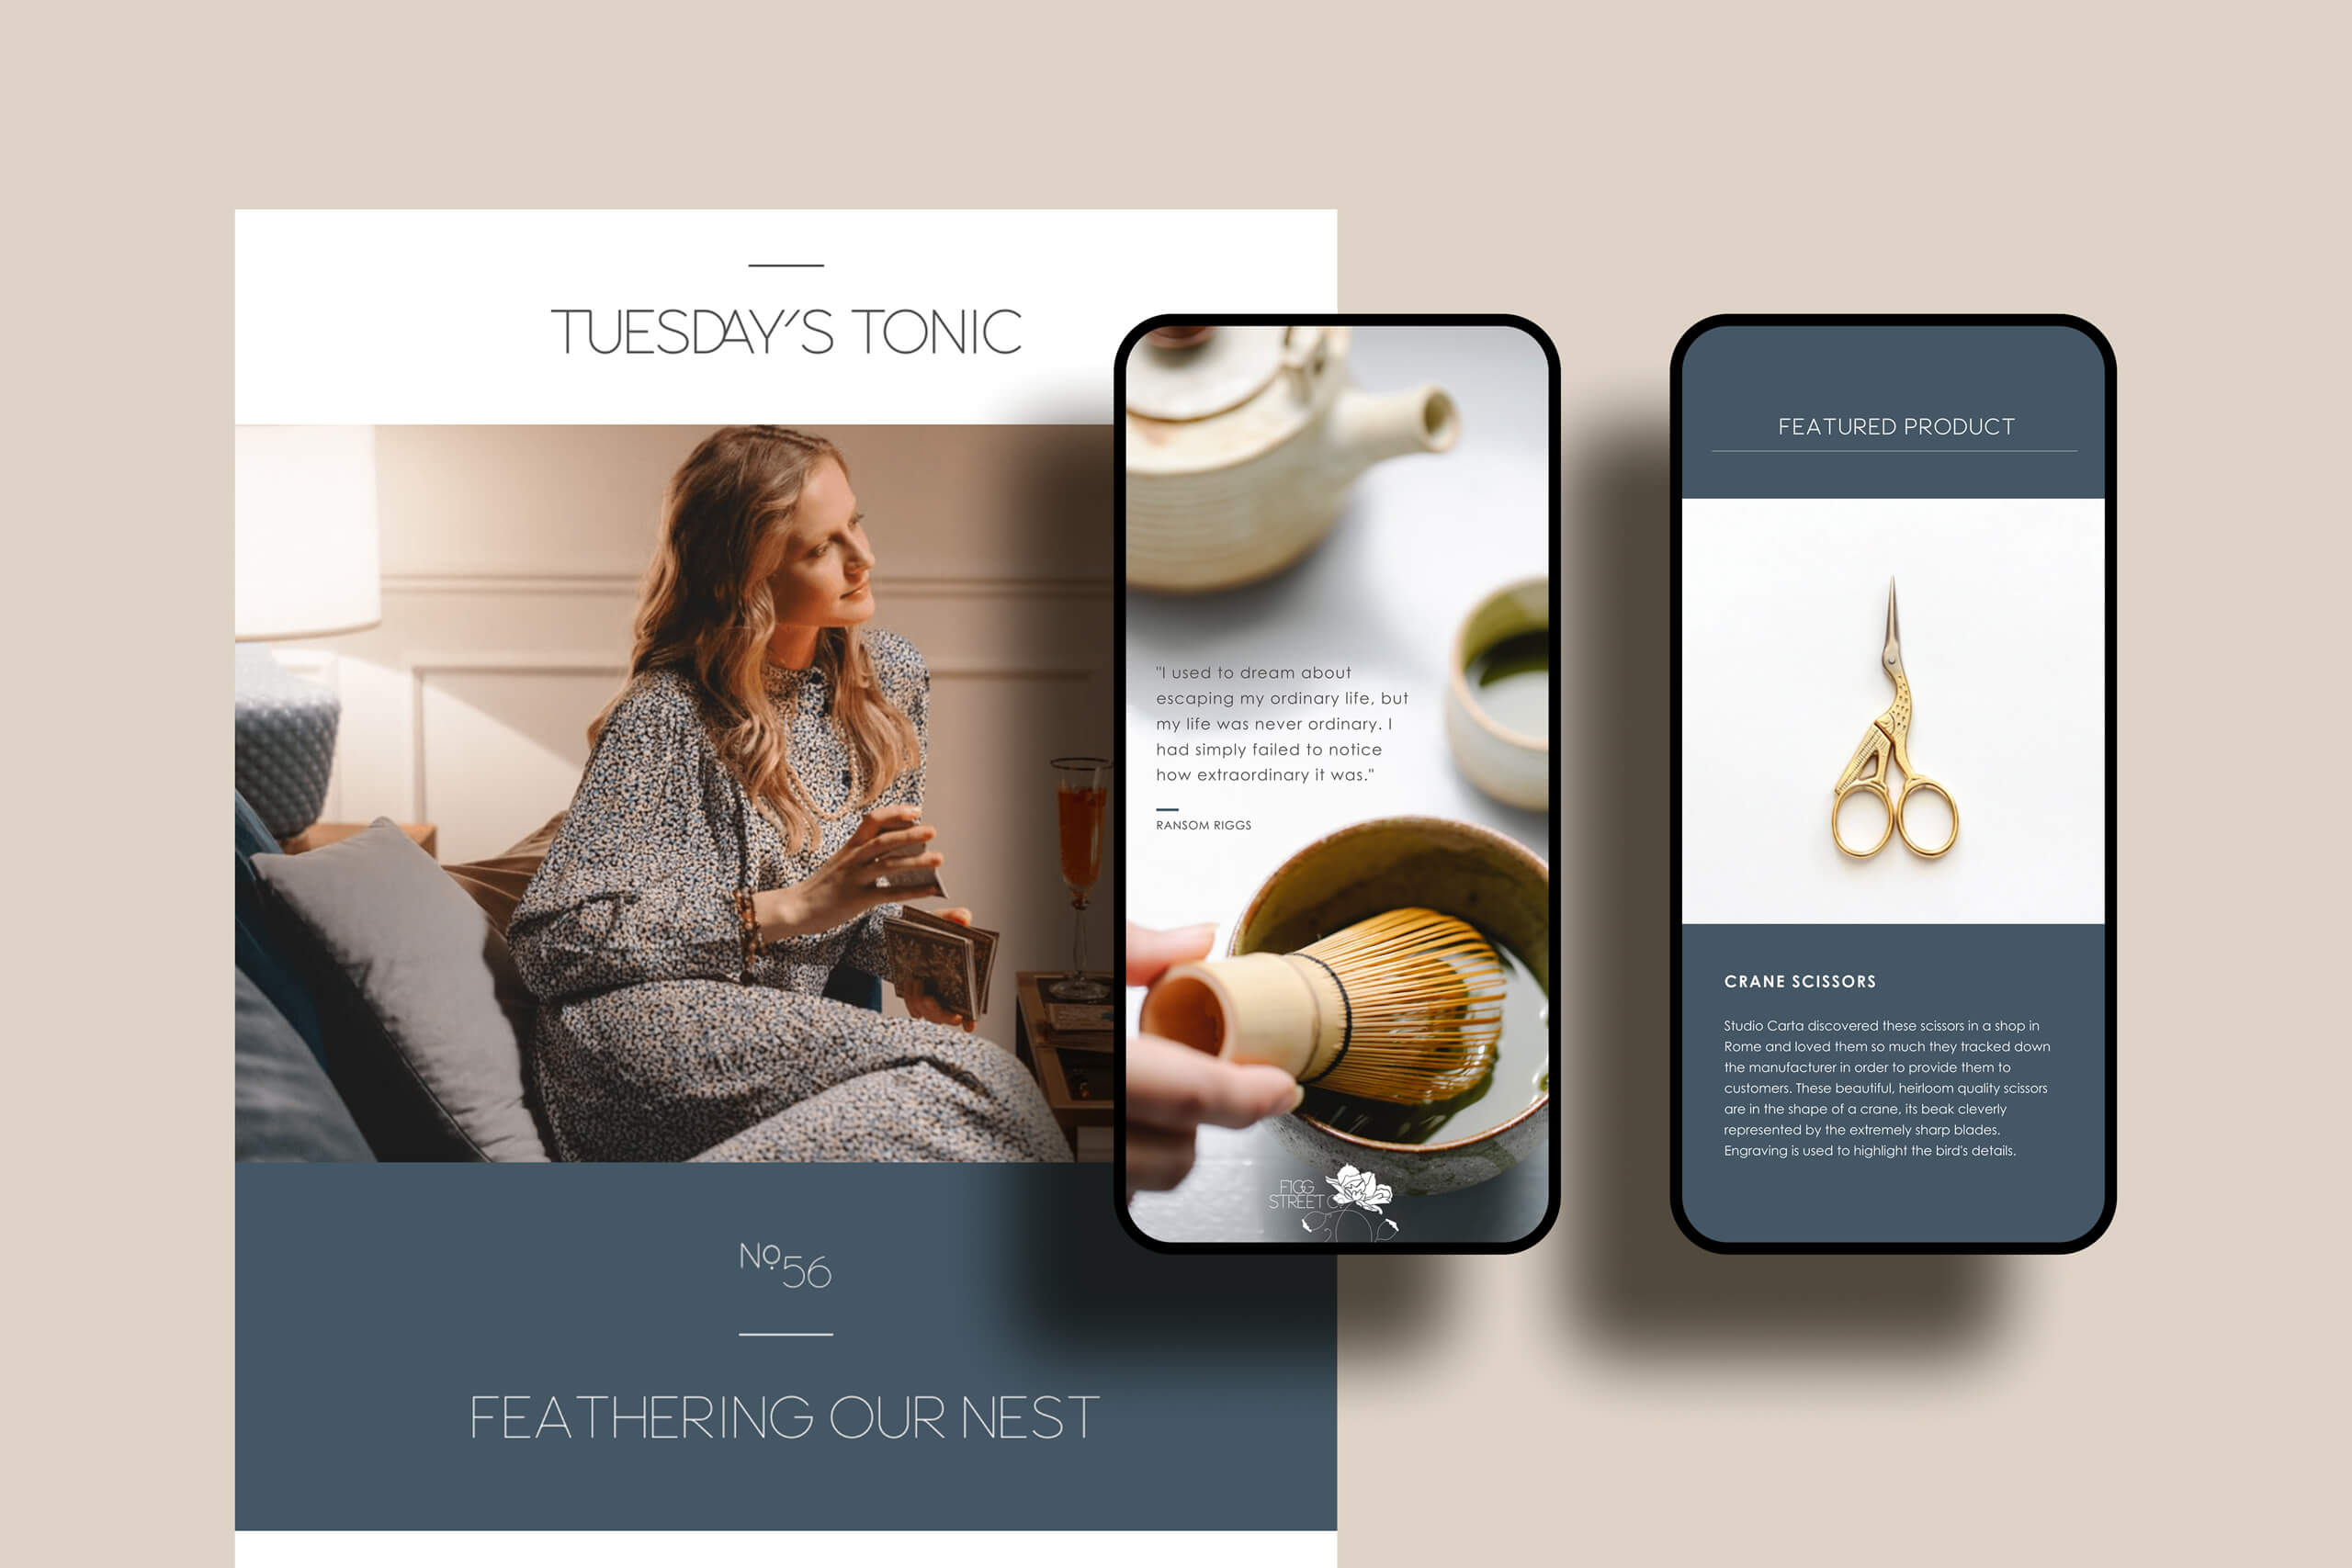 Digital marketing design for Figg Street Co. Tuesday's Tonic by Tulip Tree Creative